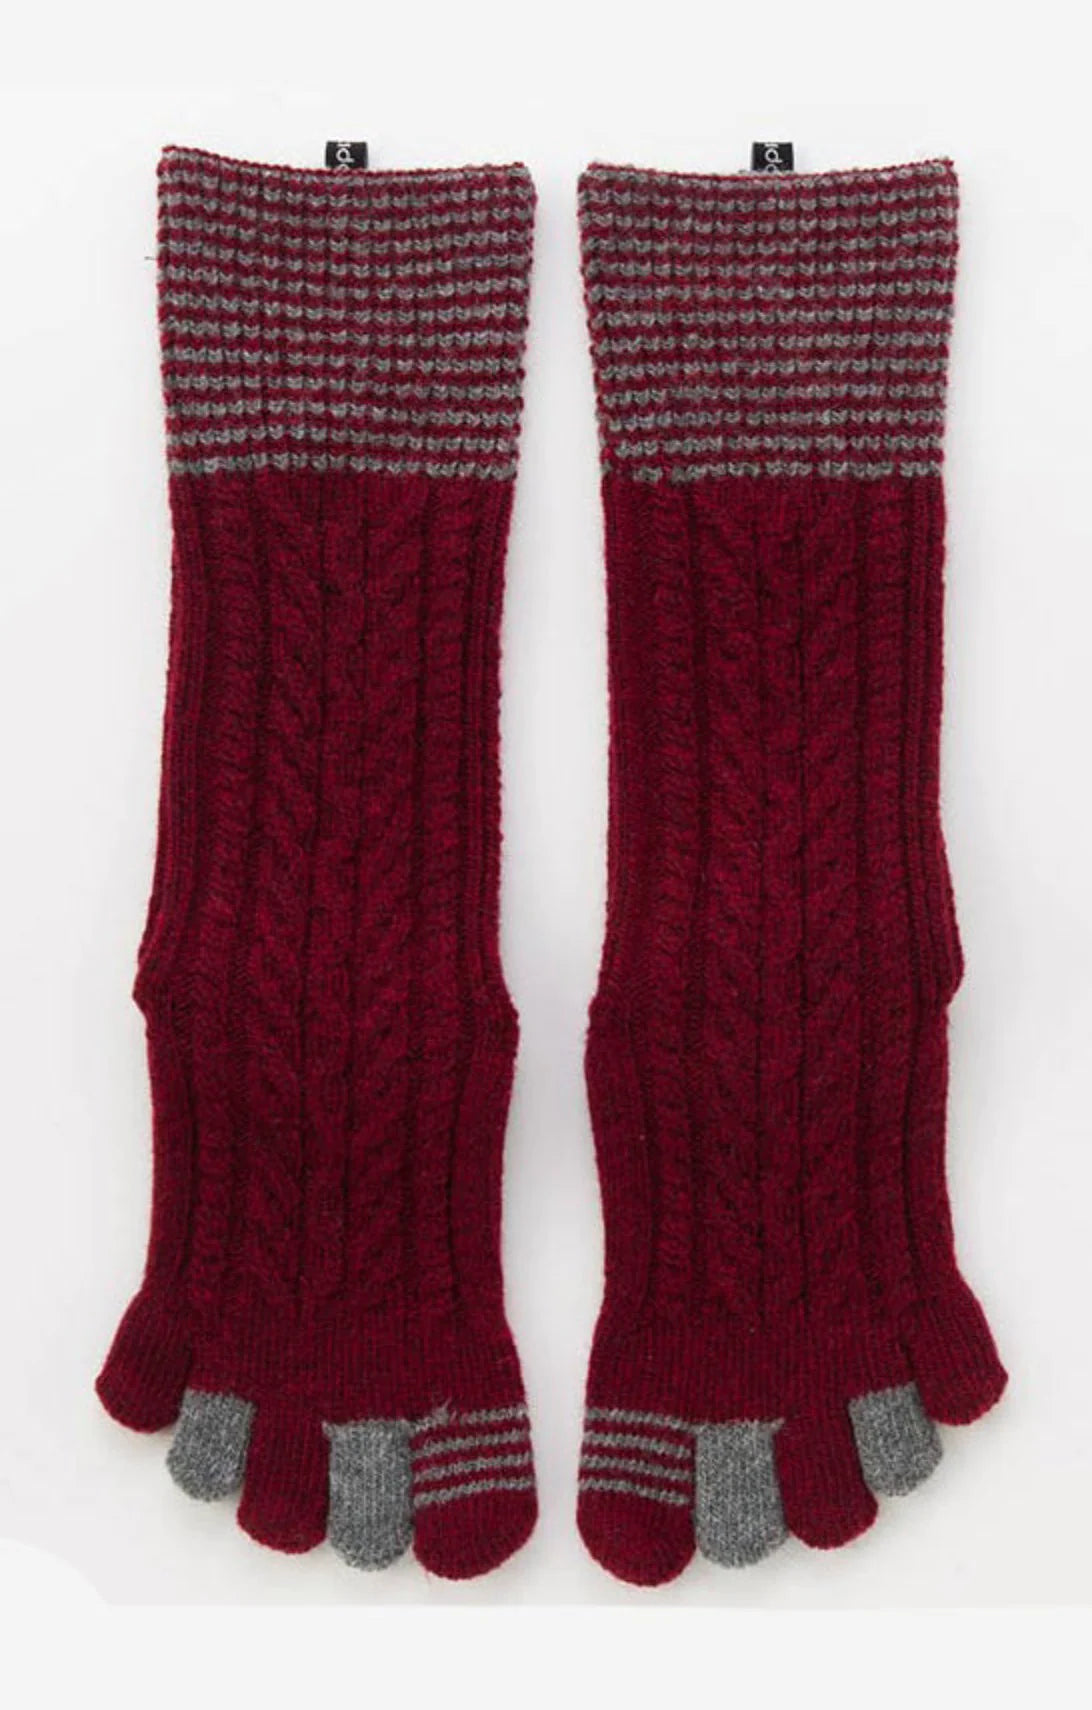 Frontal view of Knitido plus's Wool Blend Cable Striped Midcalf Toe Socks in Dark Red color